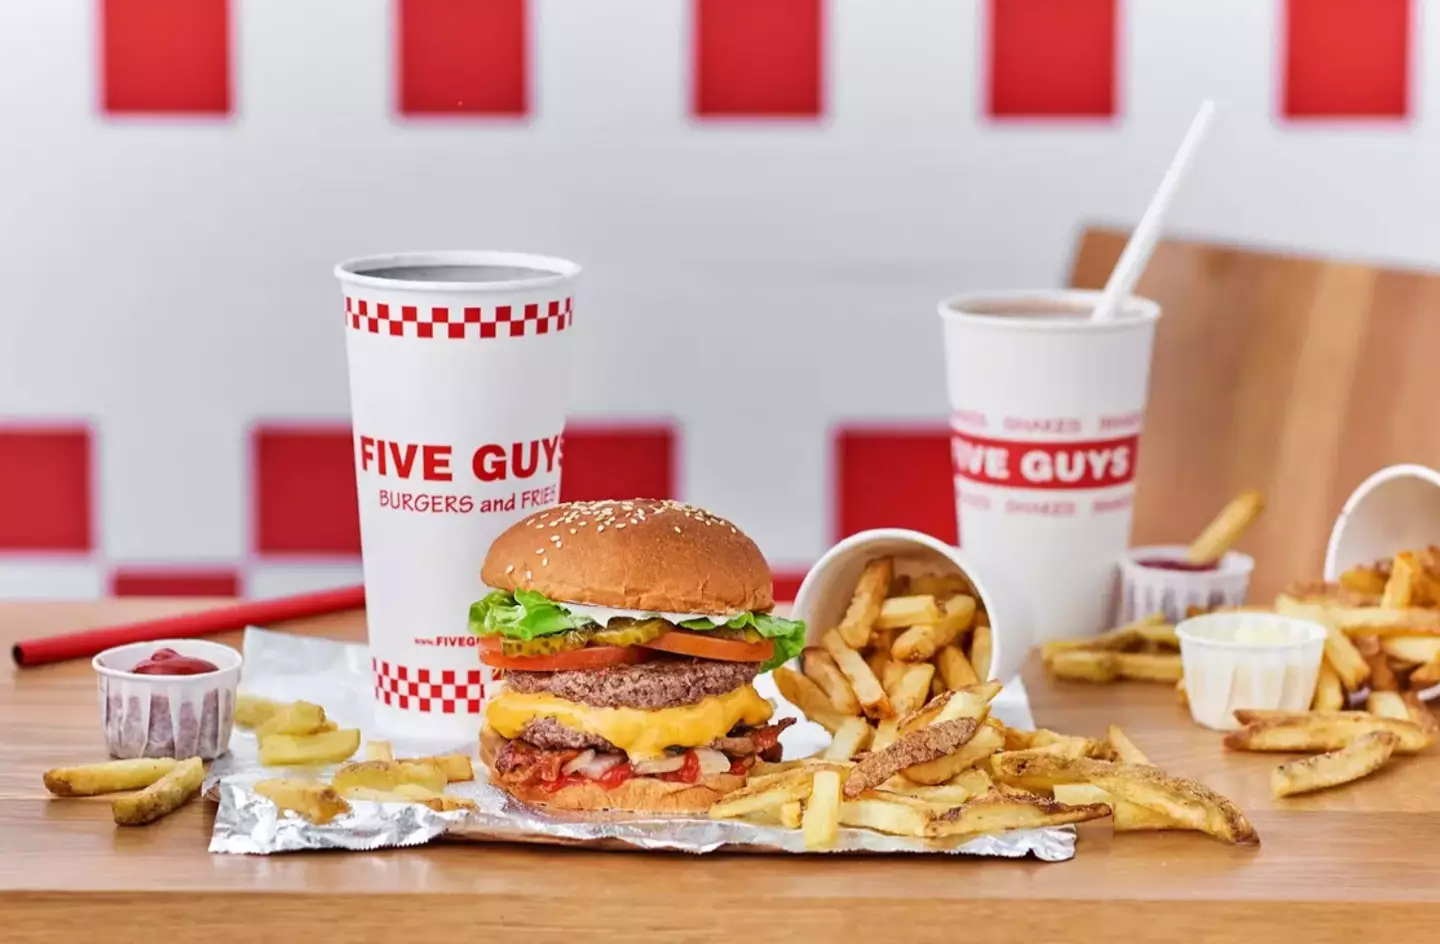 Five Guys' CEO has previously explained the reasoning behind the prices.